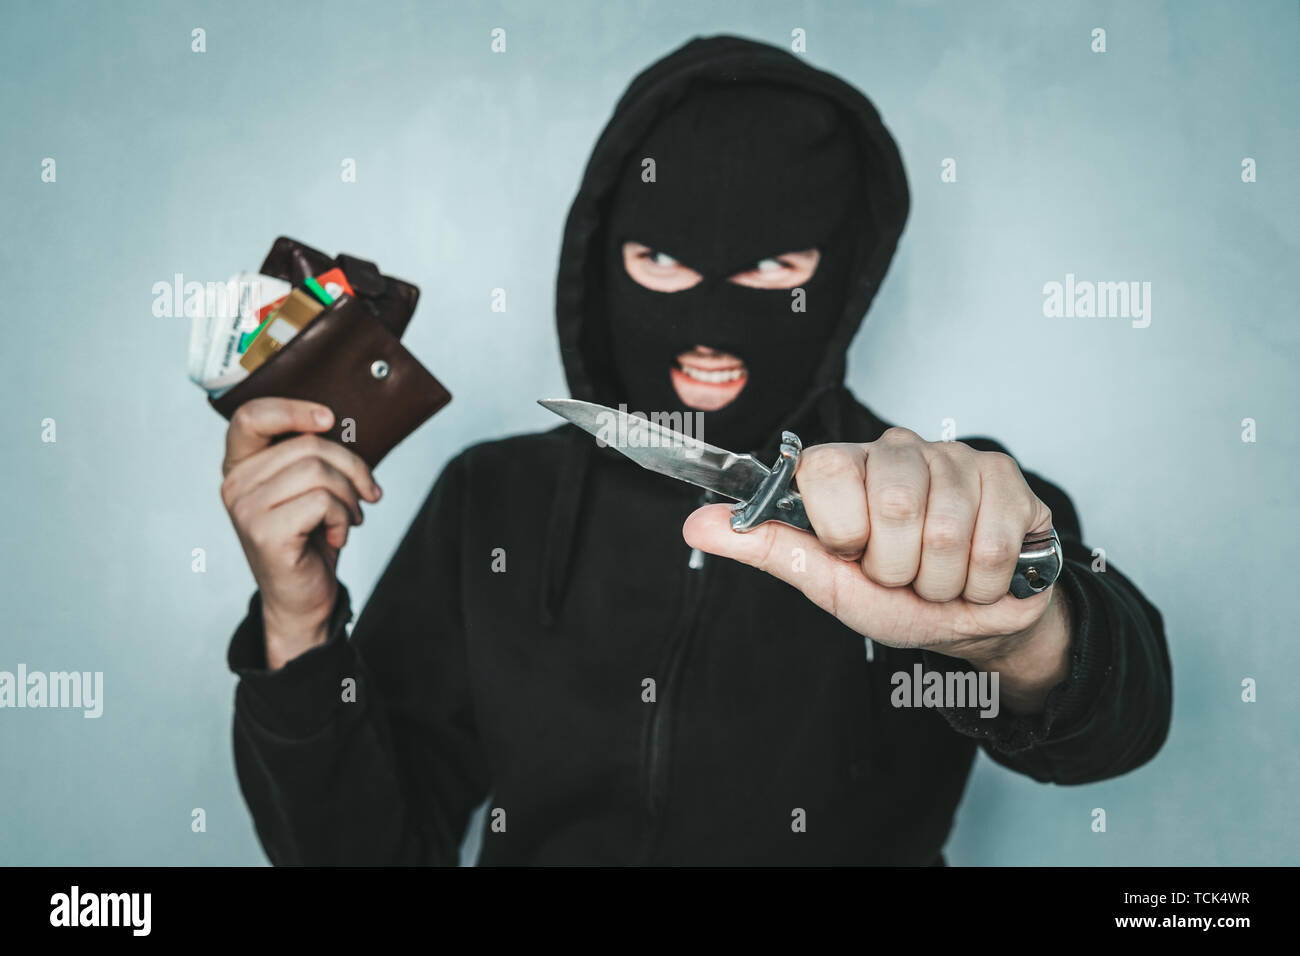 criminal robbery concept. An evil robber threatens with a knife and holds a stolen purse in his hand. Mortal danger. The malevolent thief smiles. Stock Photo